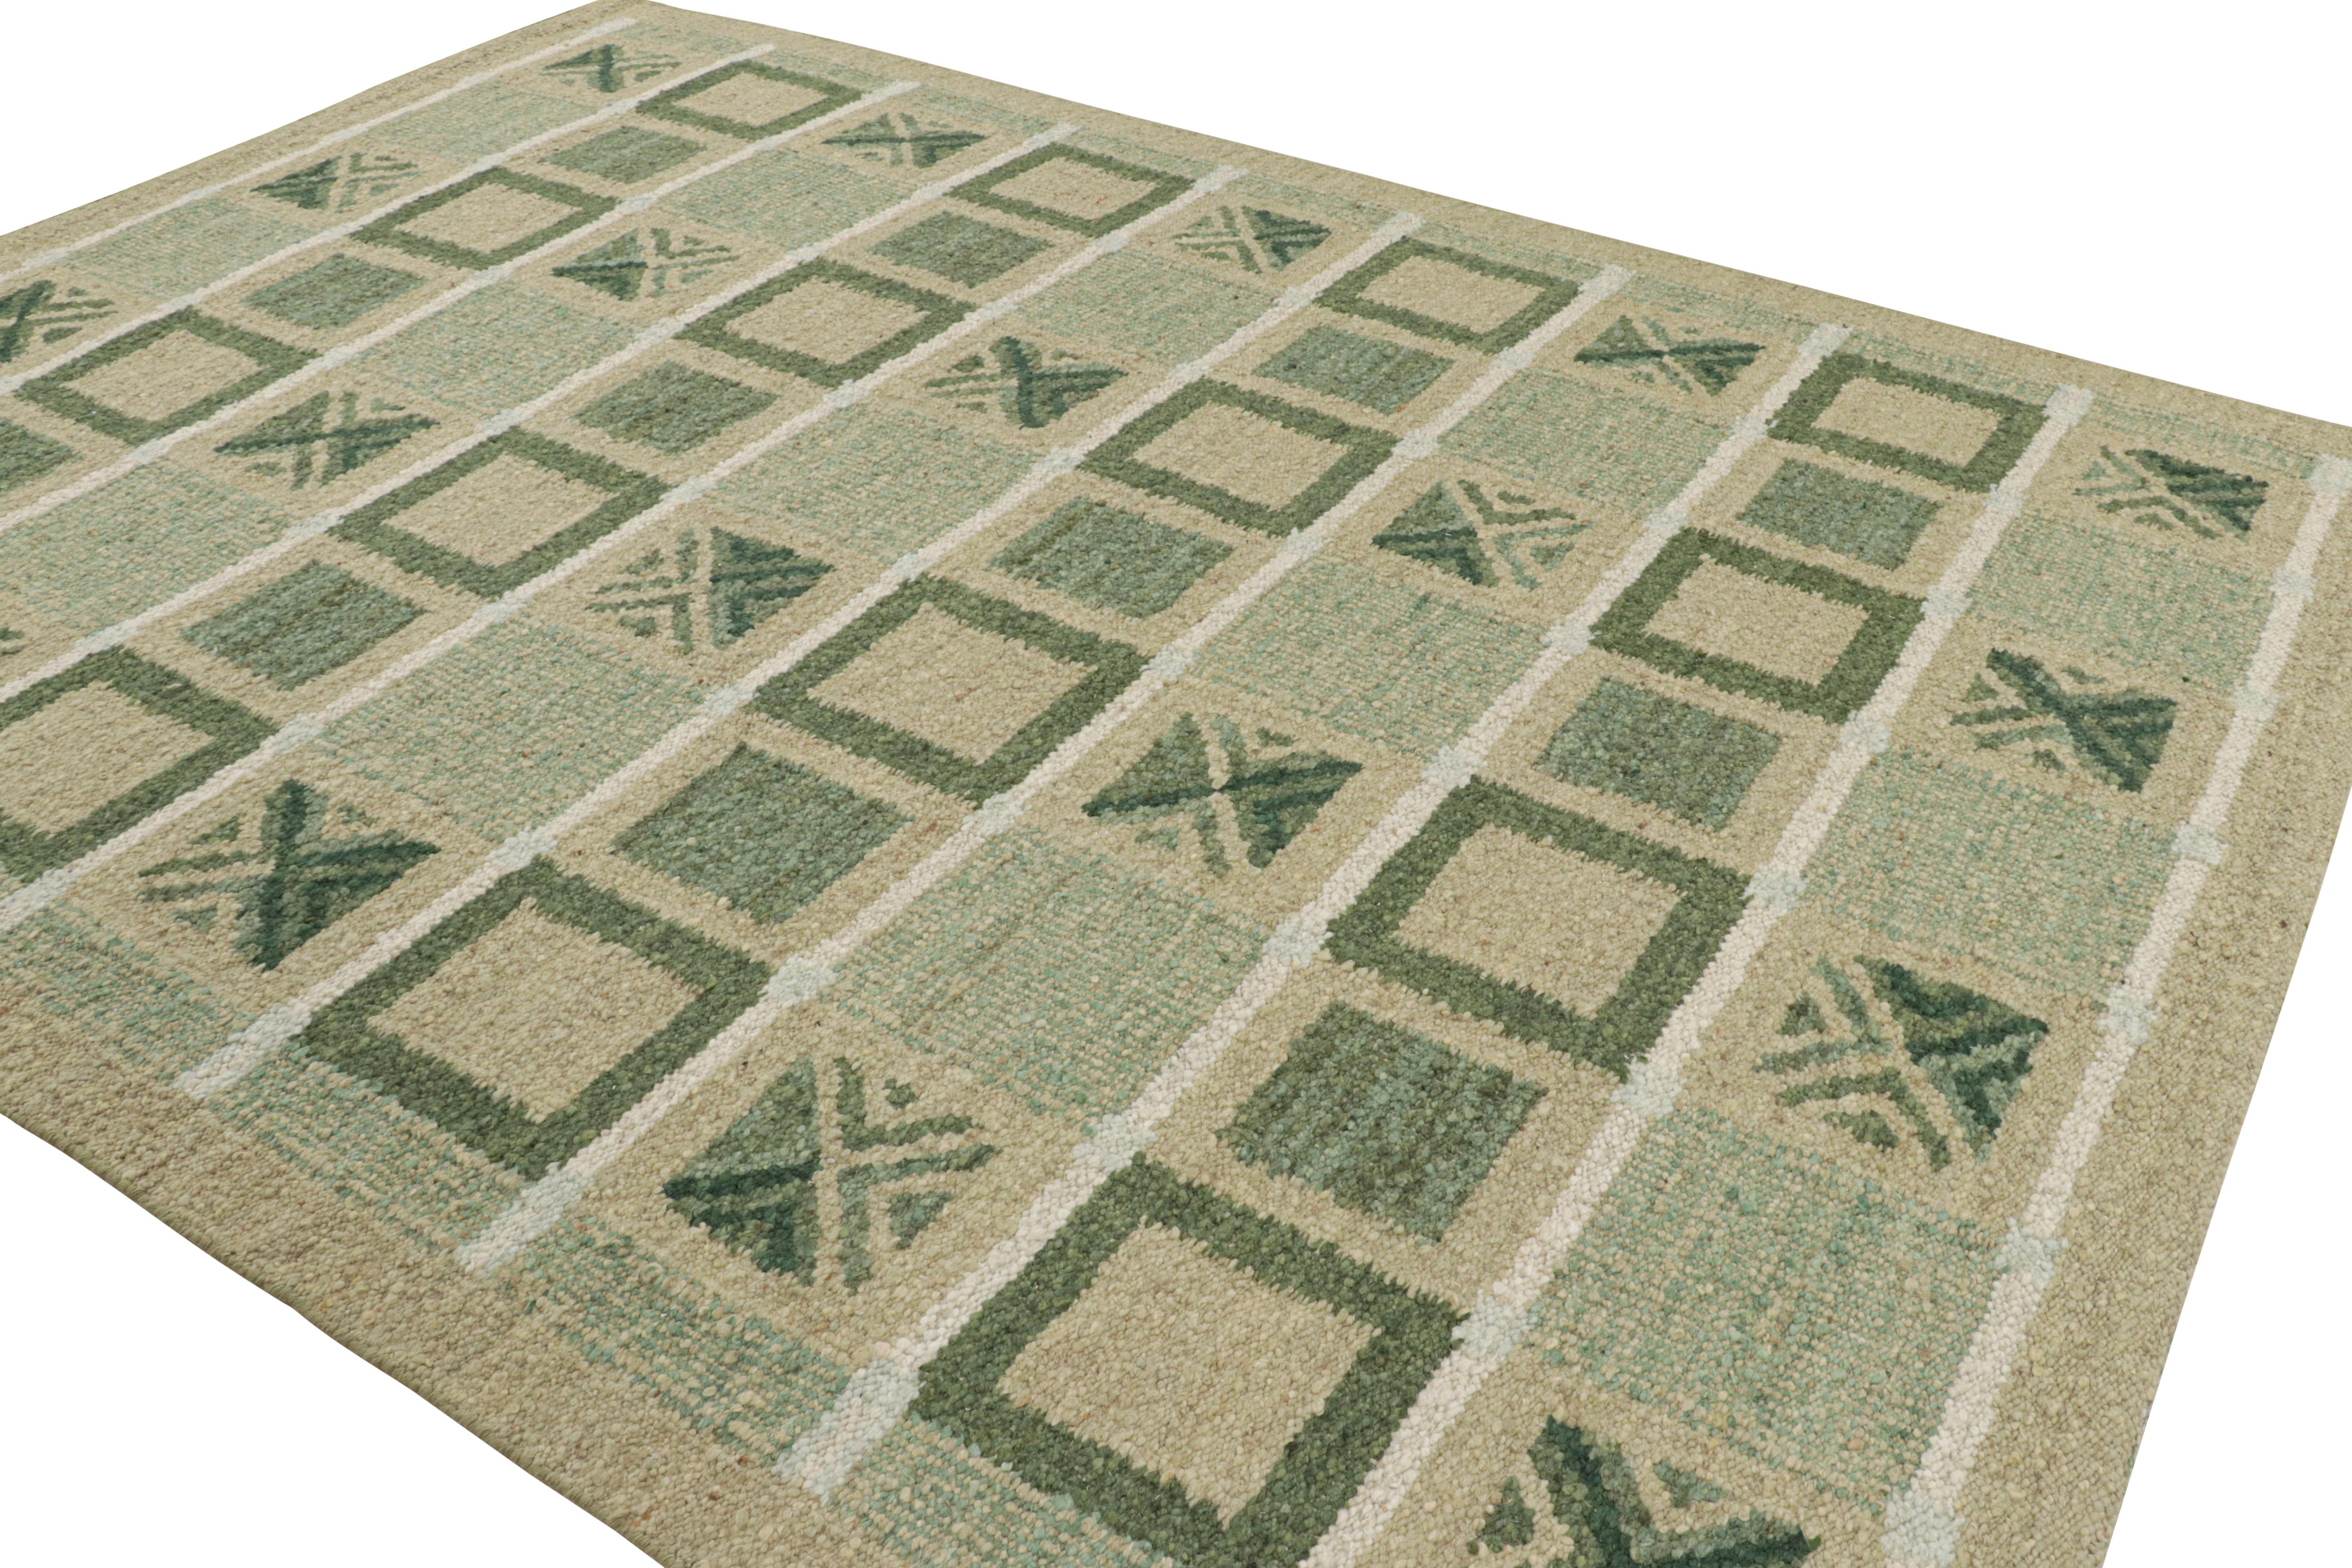 Indian Rug & Kilim’s Scandinavian Style Rug with Green, Beige-Brown Geometric Patterns For Sale